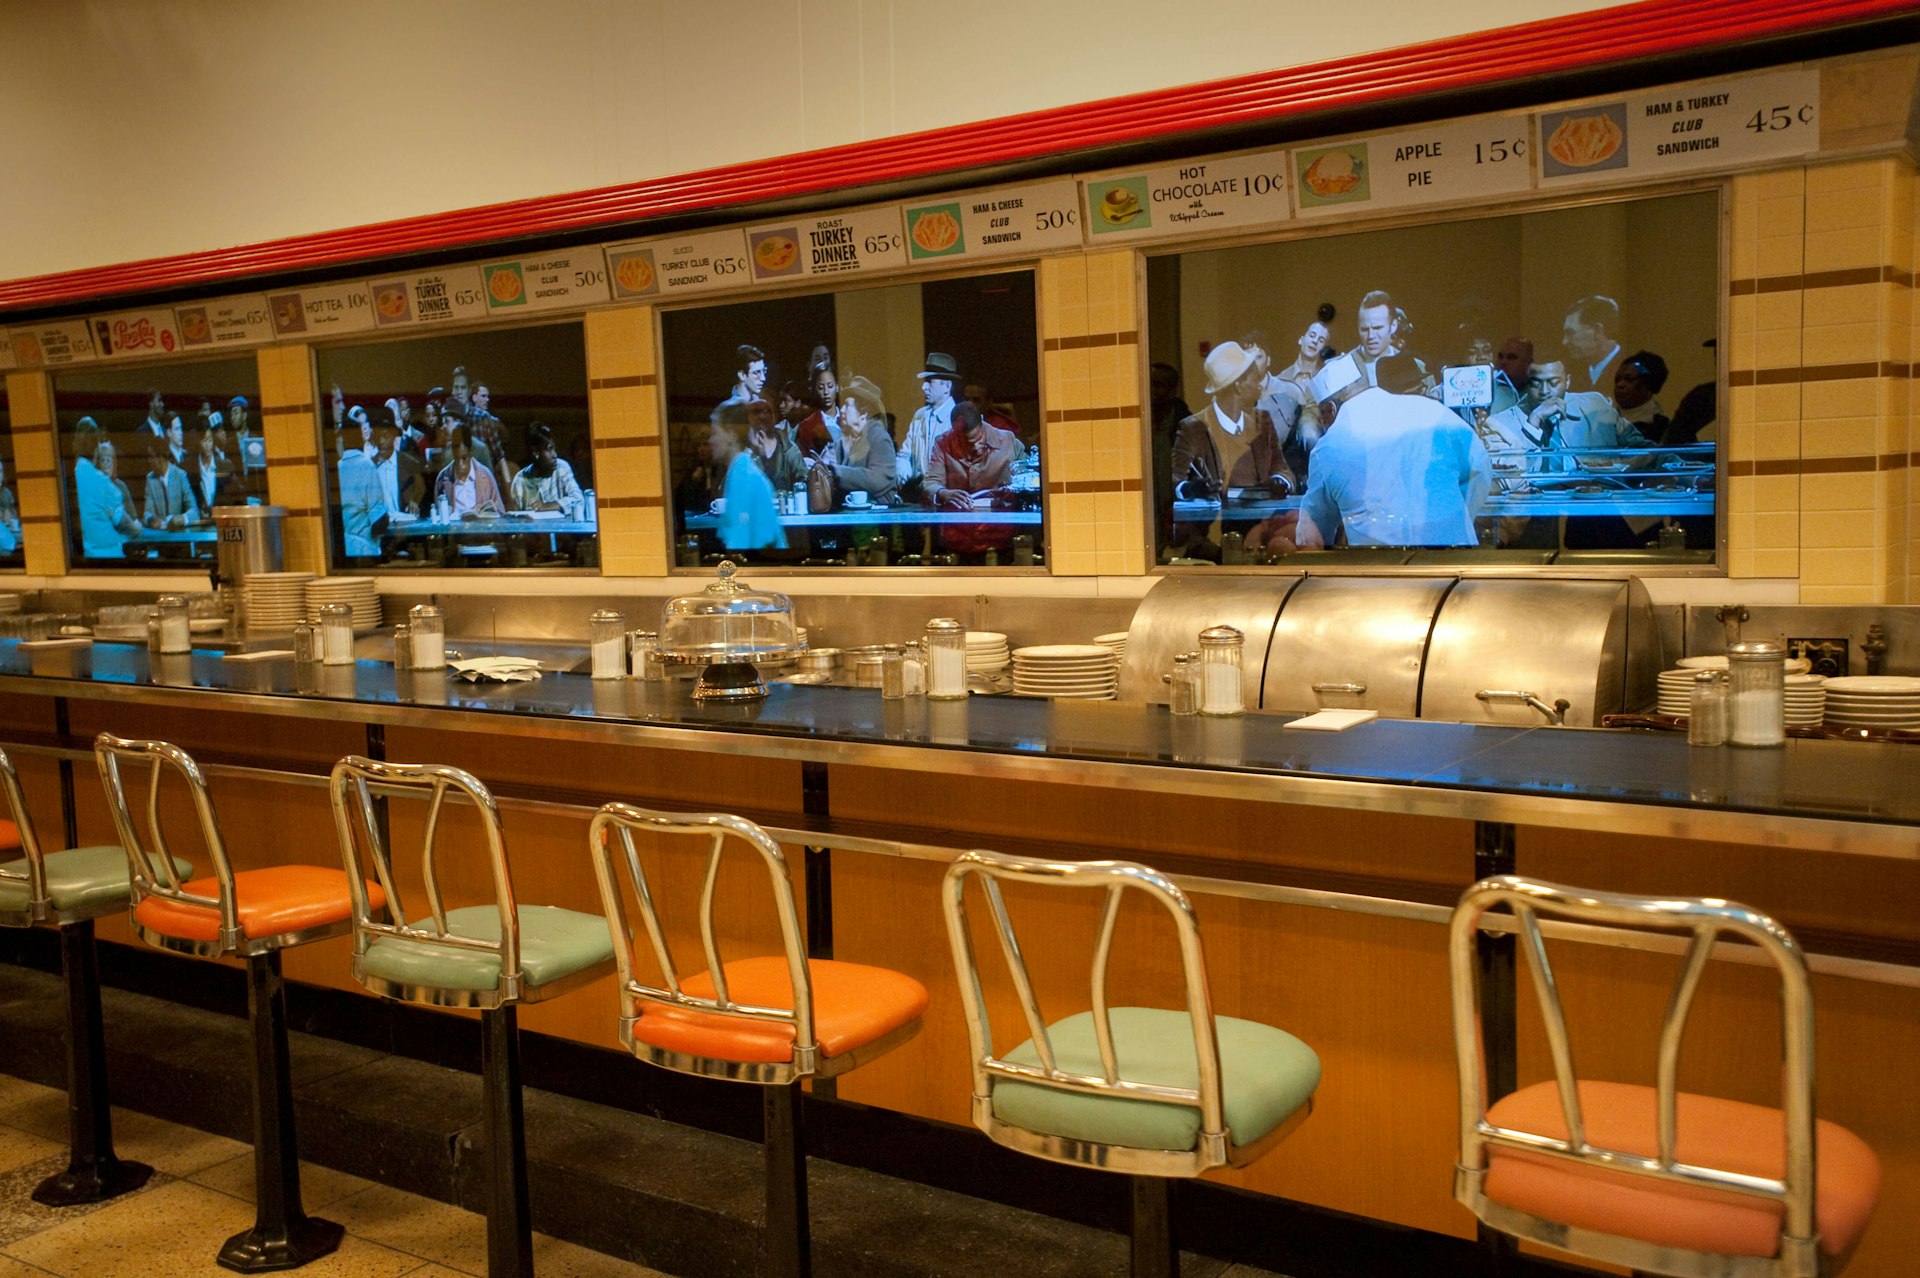 The lunch counter at Greensboro's Woolworths, site of the 1960 sit-in that launched a movement, now the International Civil Rights Center and Museum